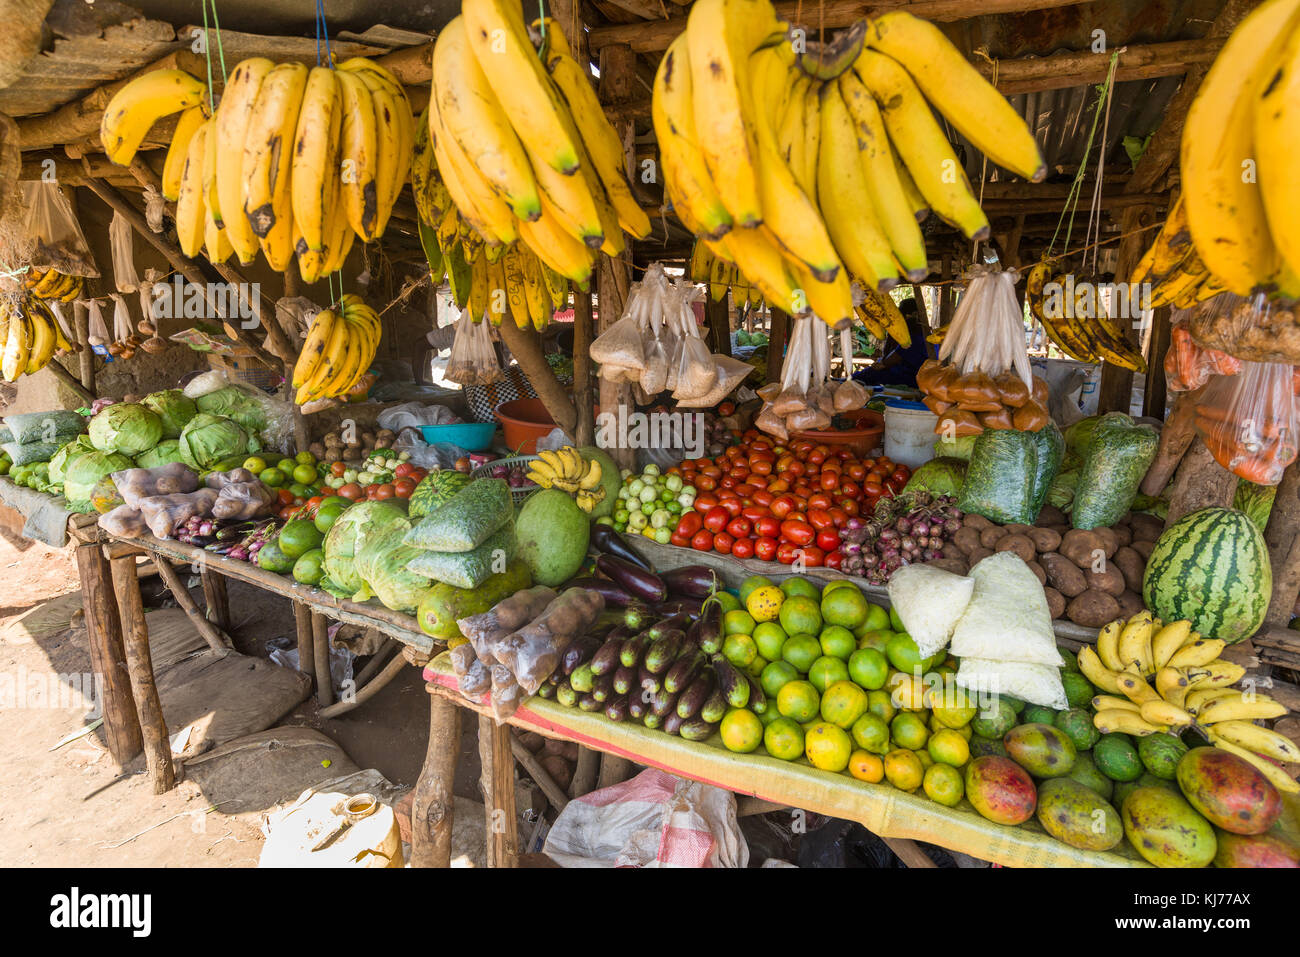 A typical Ugandan market stall with fresh fruit and vegetables on display, Uganda, Africa Stock Photo